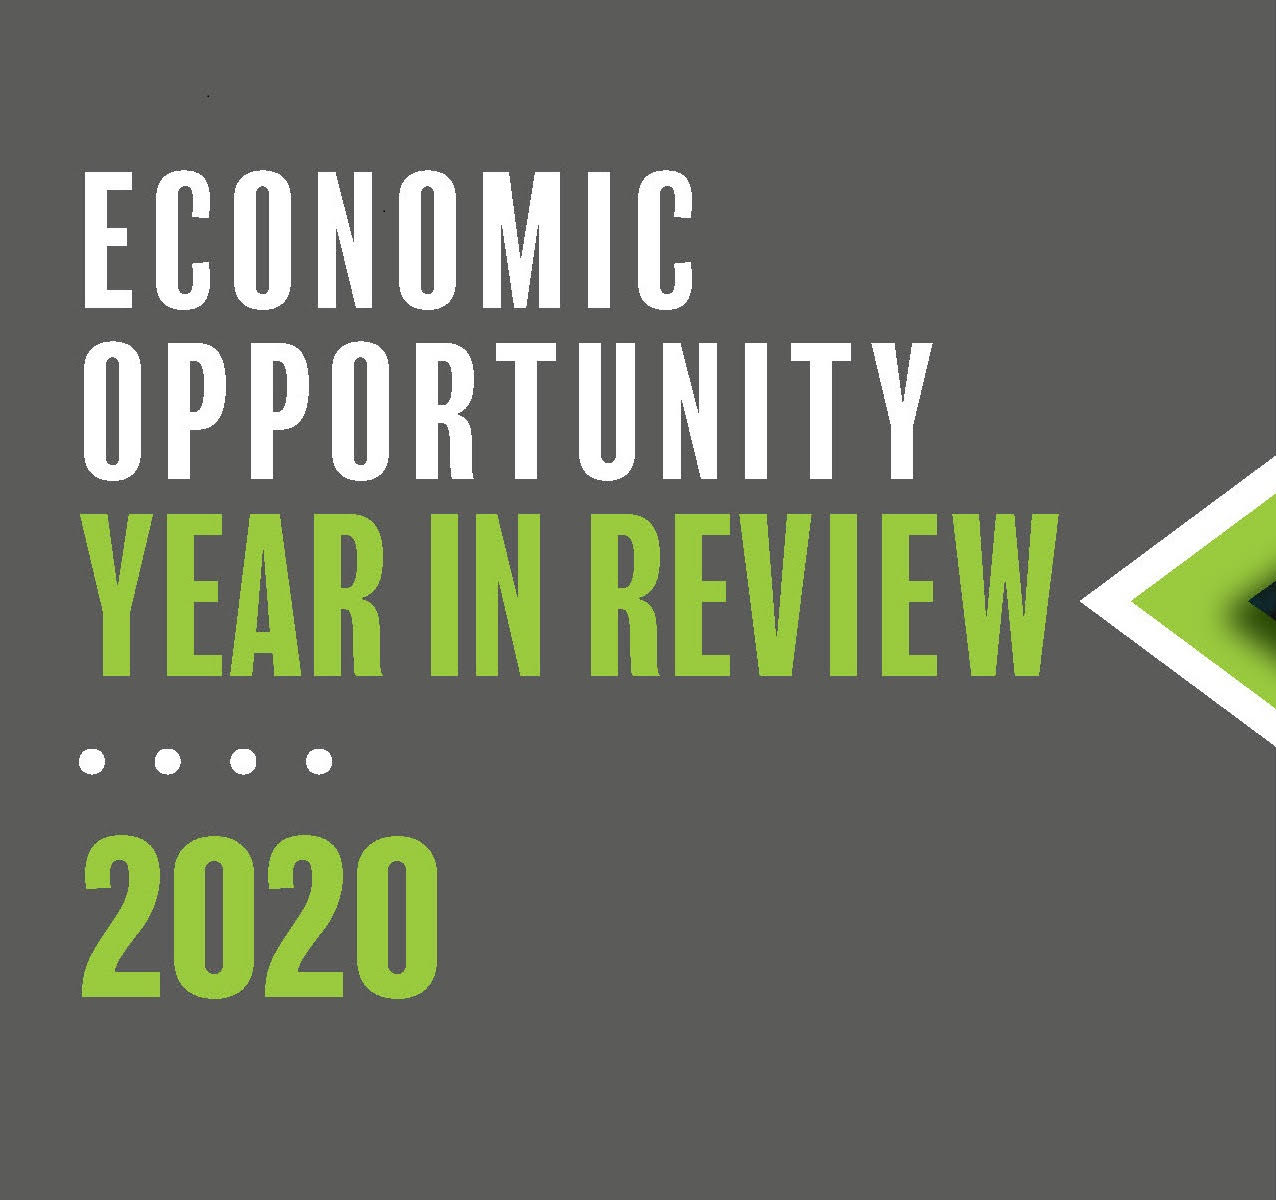 We’re Pleased to Share Our 2020 Economic Opportunity Year in Review!